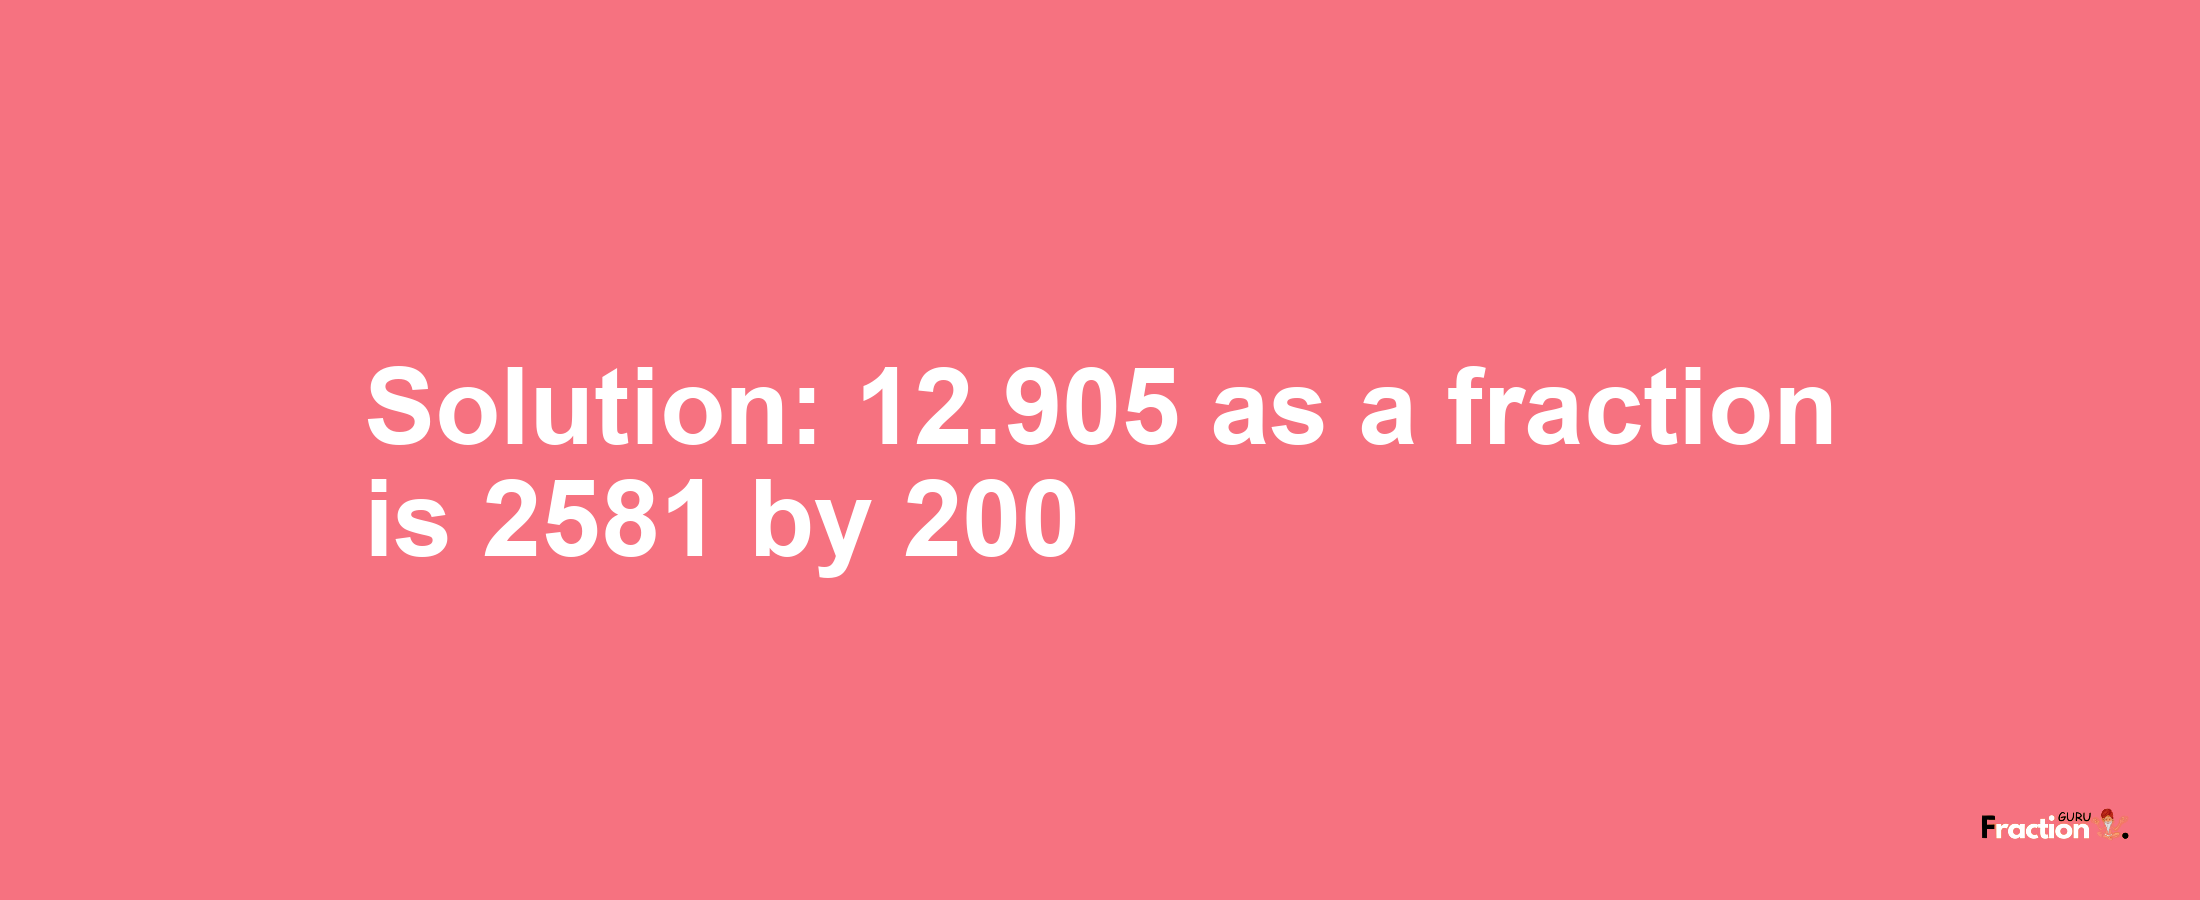 Solution:12.905 as a fraction is 2581/200